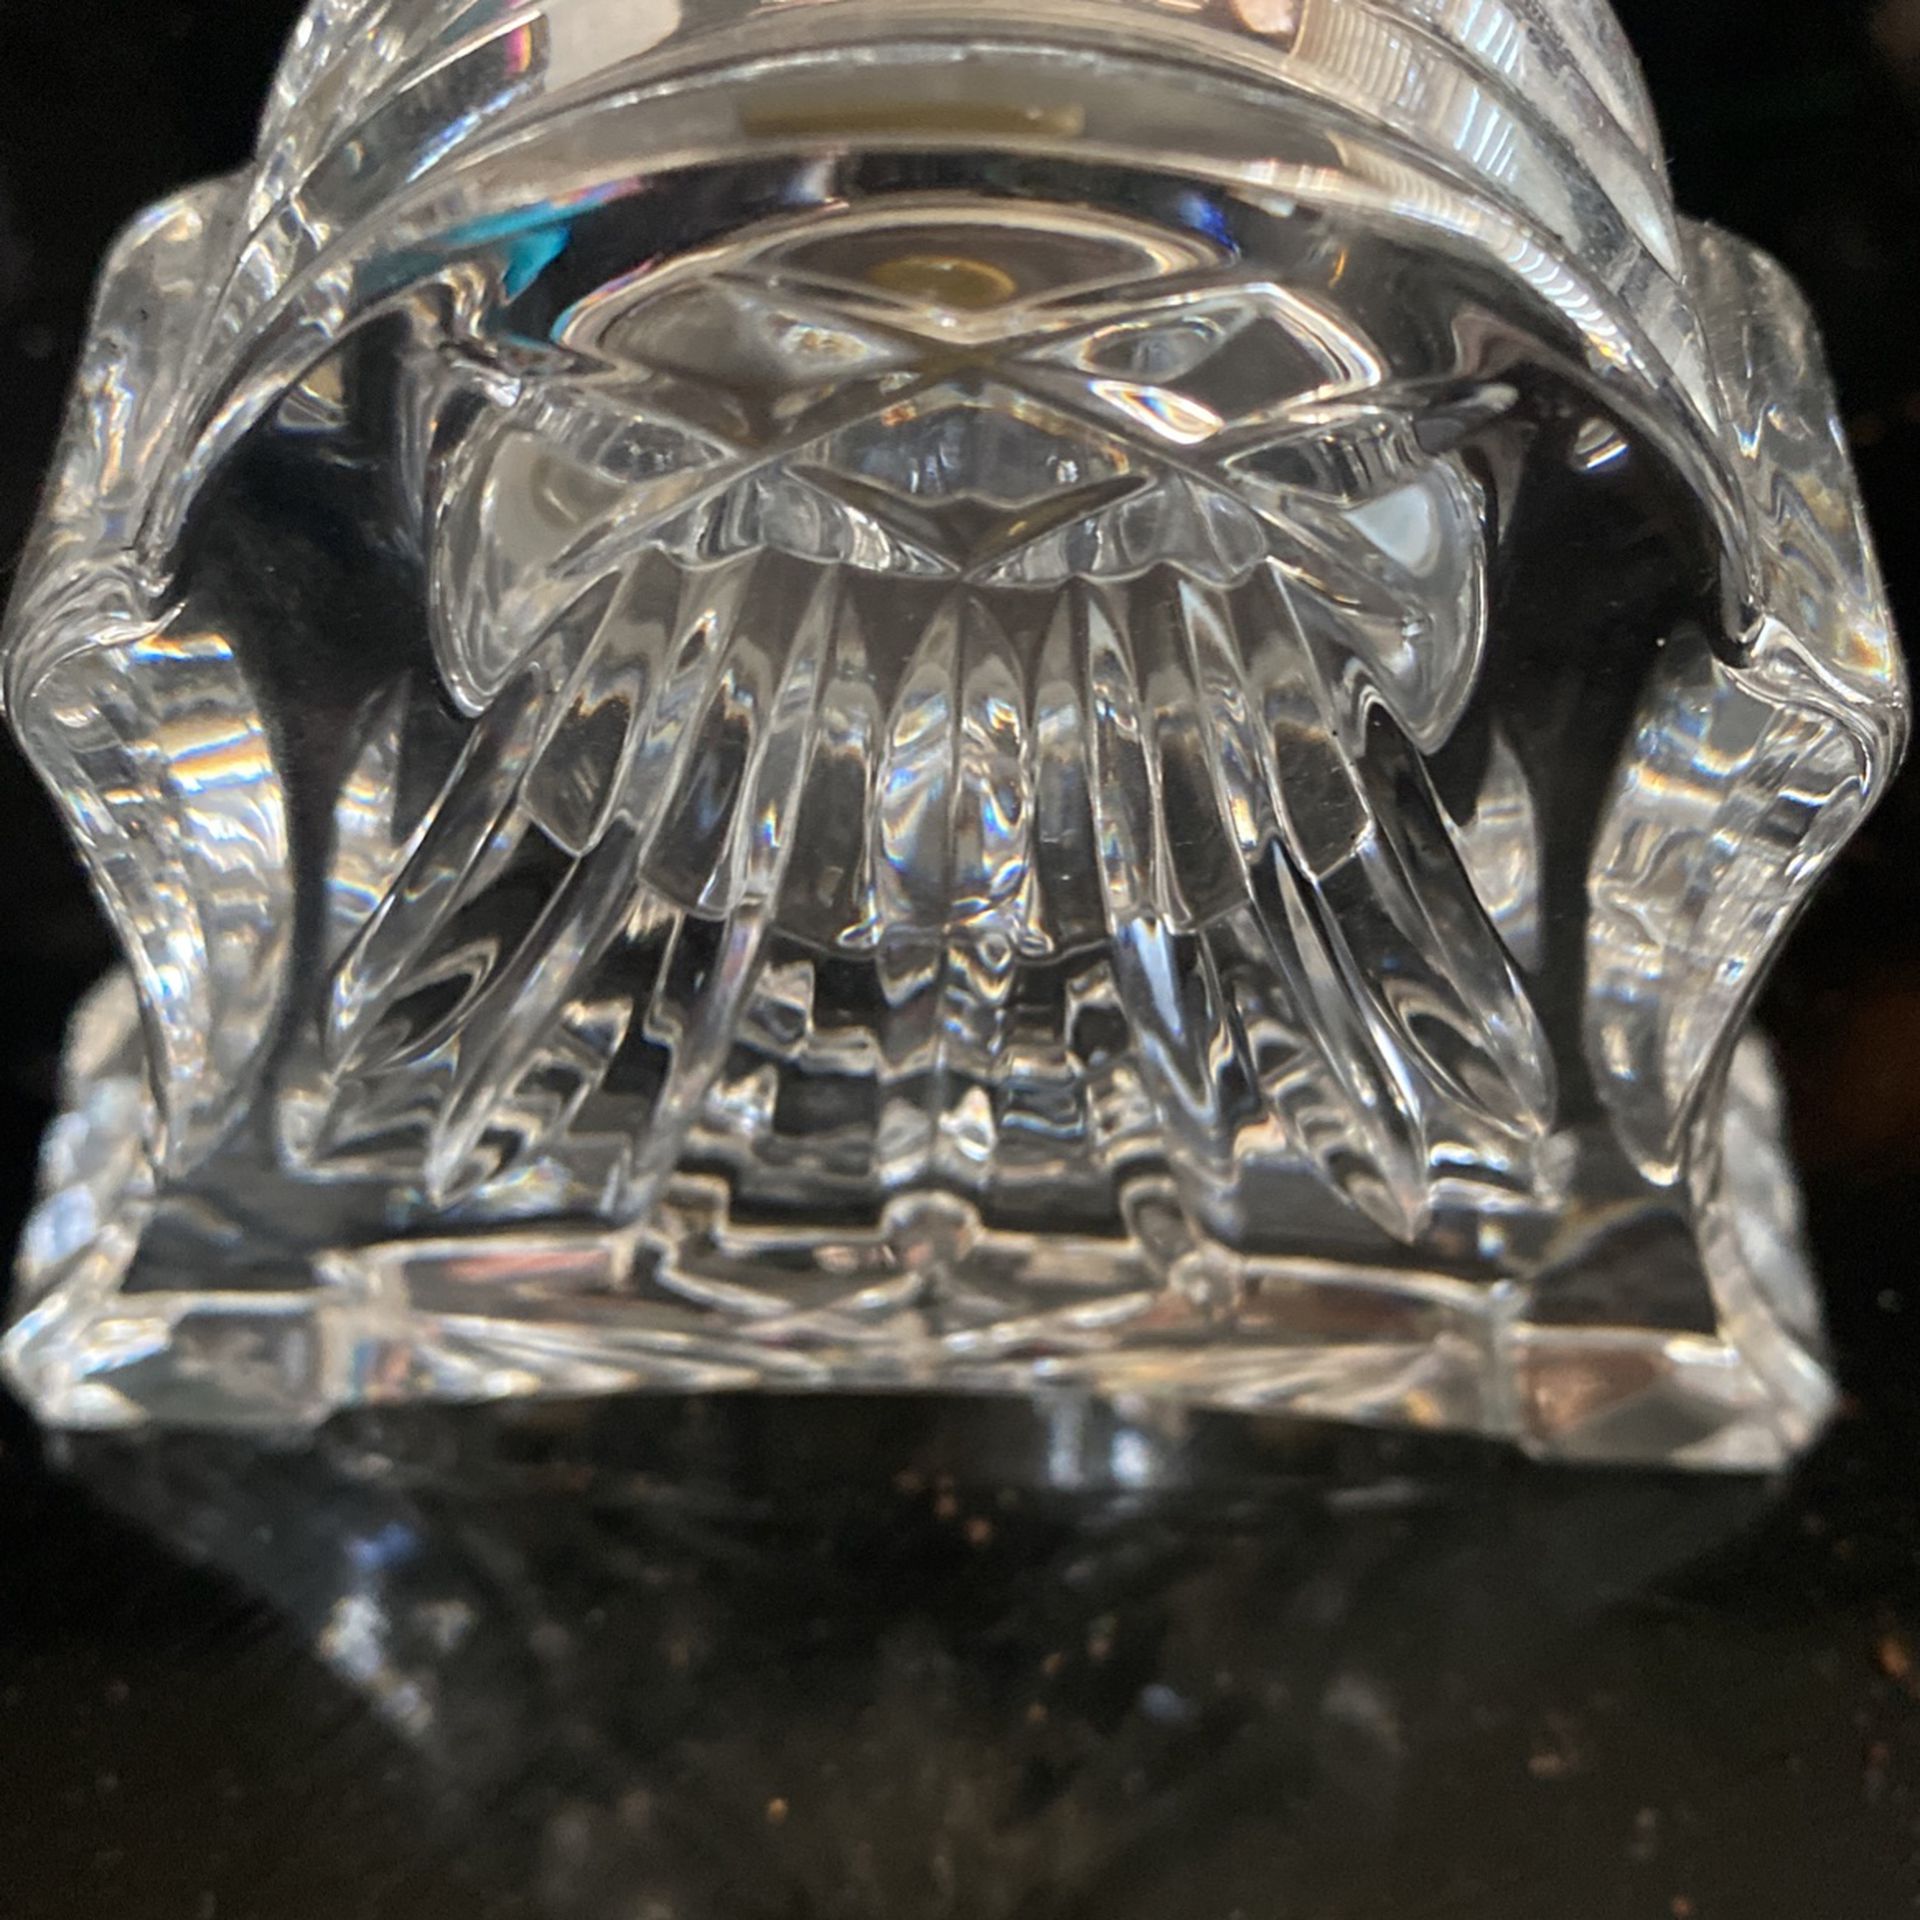 Waterford Crystal “Abby” Analog Desk Timepiece 